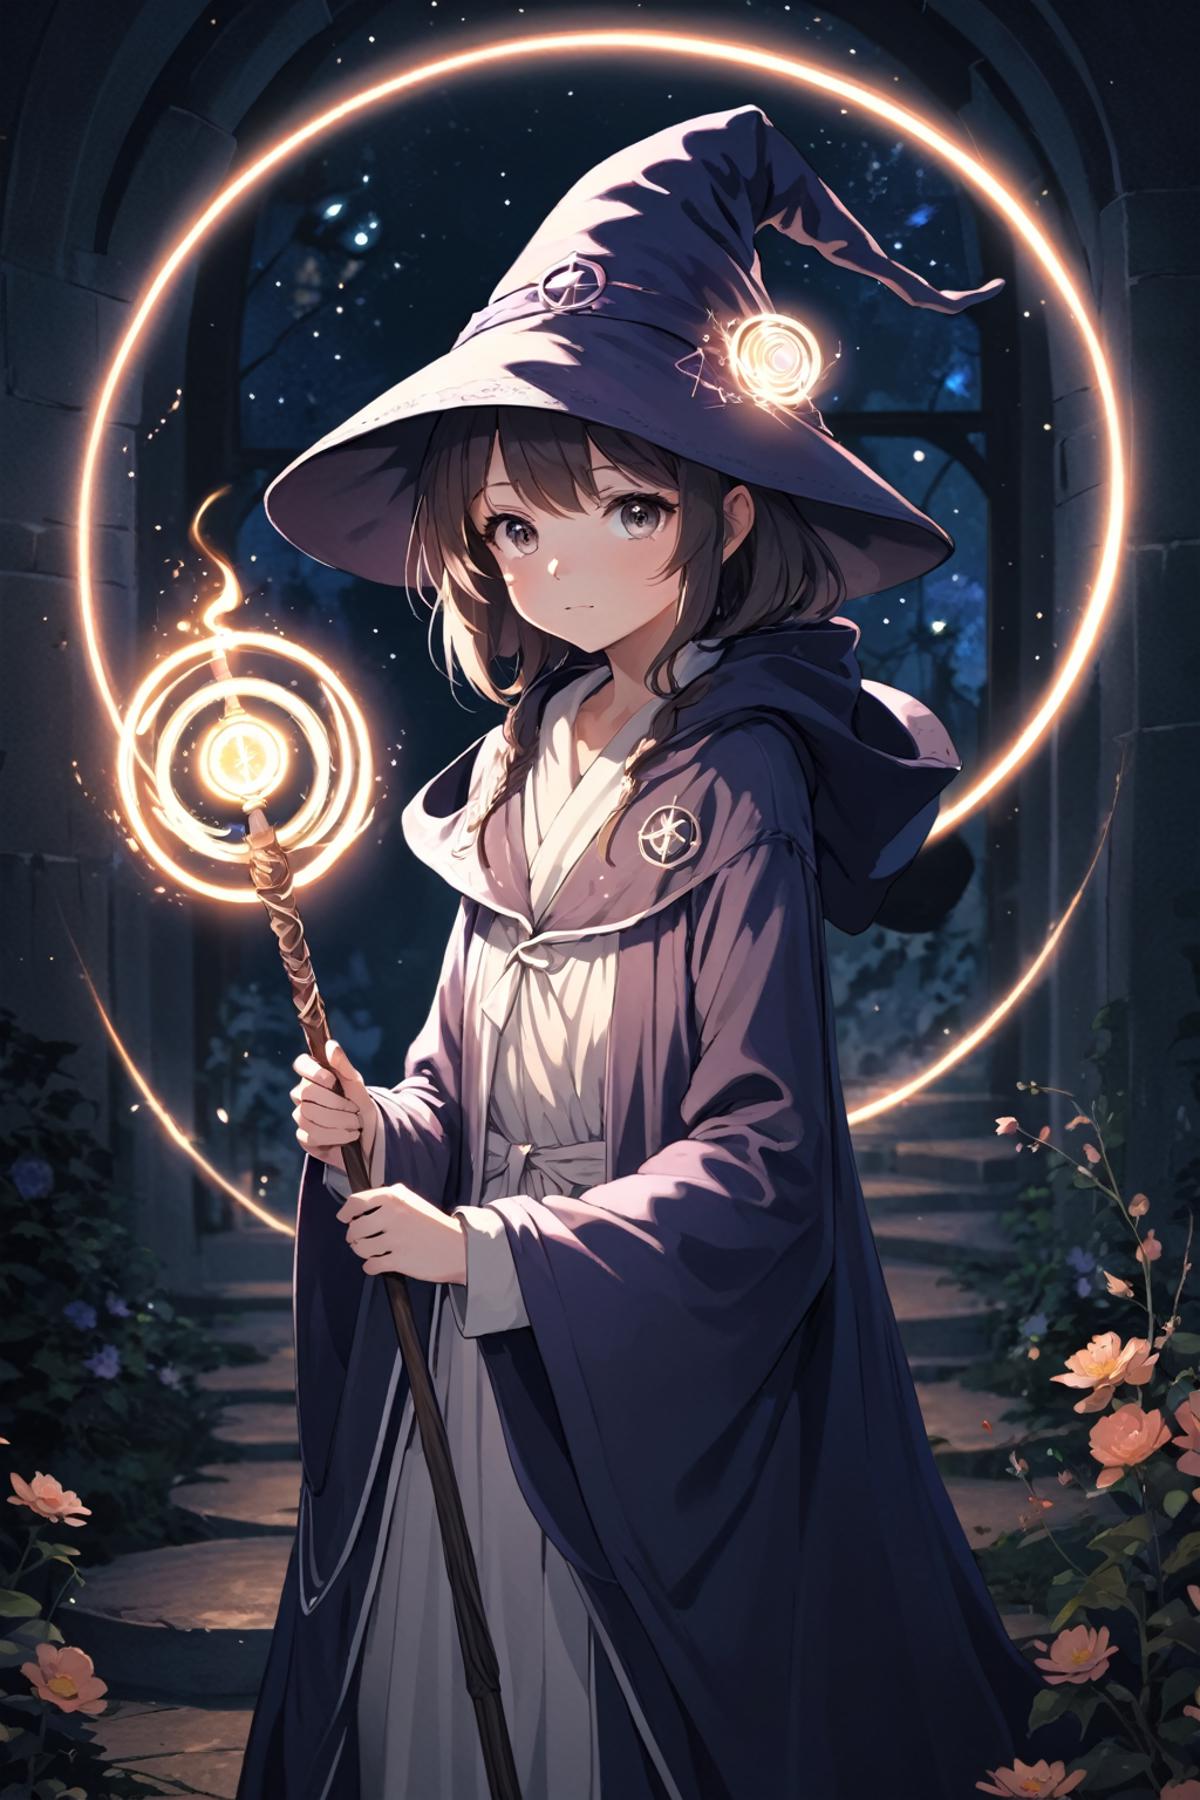 A young girl with a wand and a wizard's hat on.